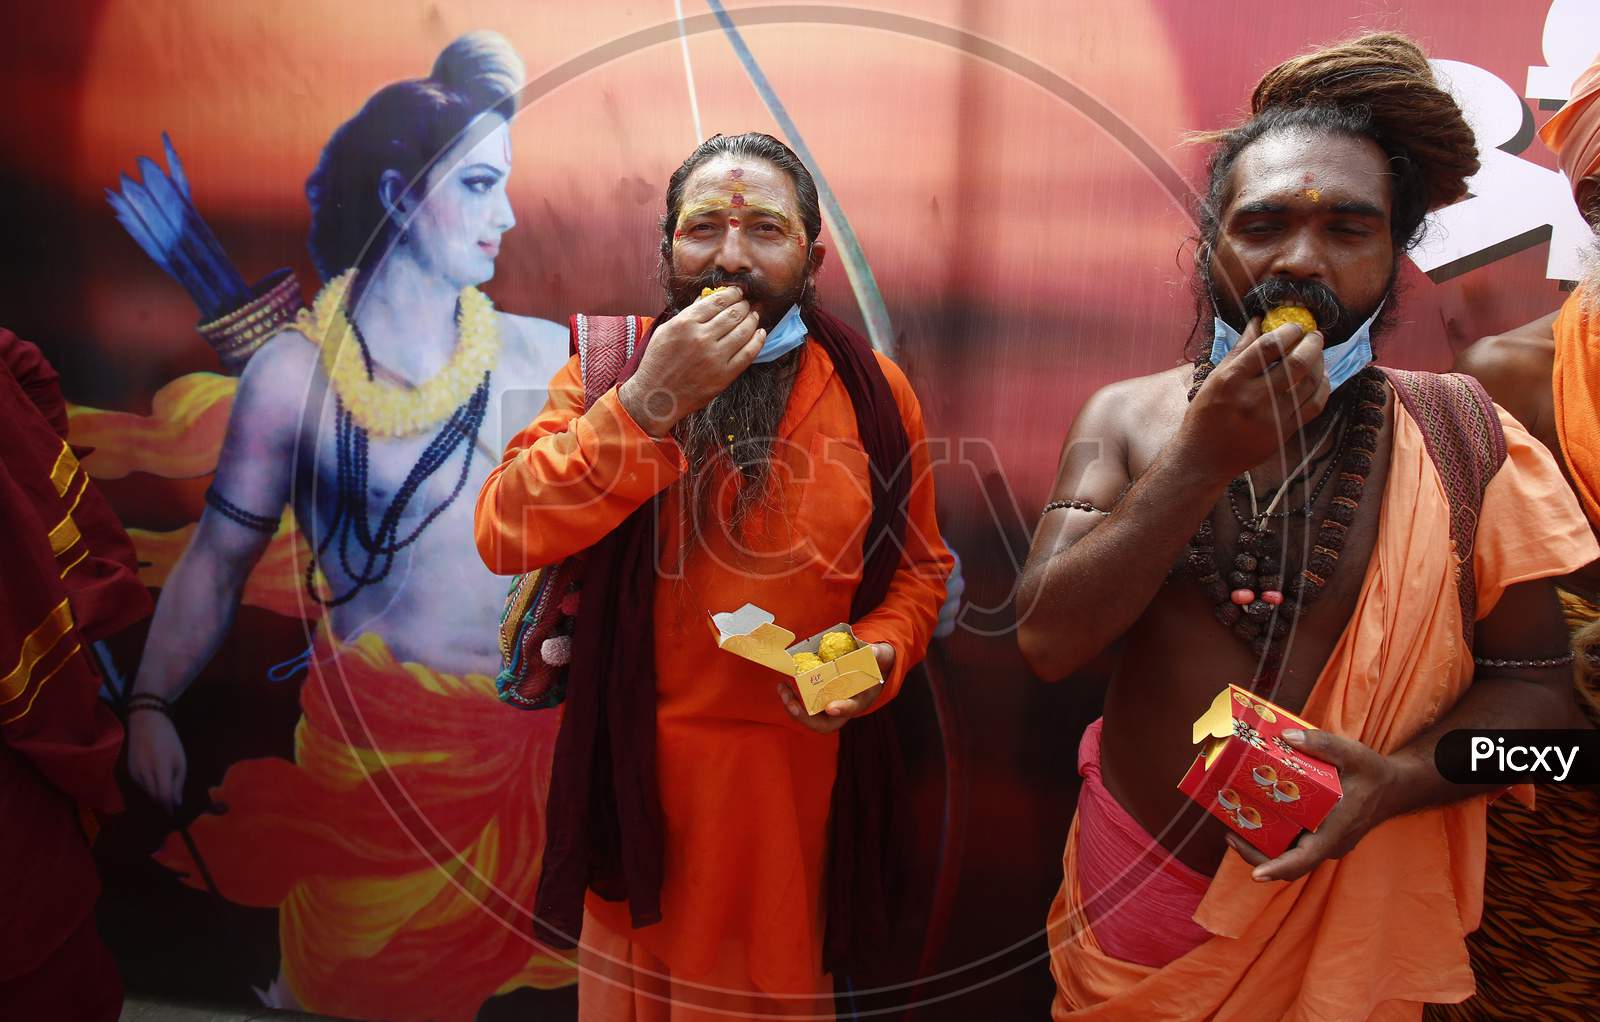 Holy men eat sweets at BJP local office during celebrations of the stone laying ceremony of the Ram Temple by Prime Minister Narendra Modi in Ayodhya, in Chandigarh August 5, 2020